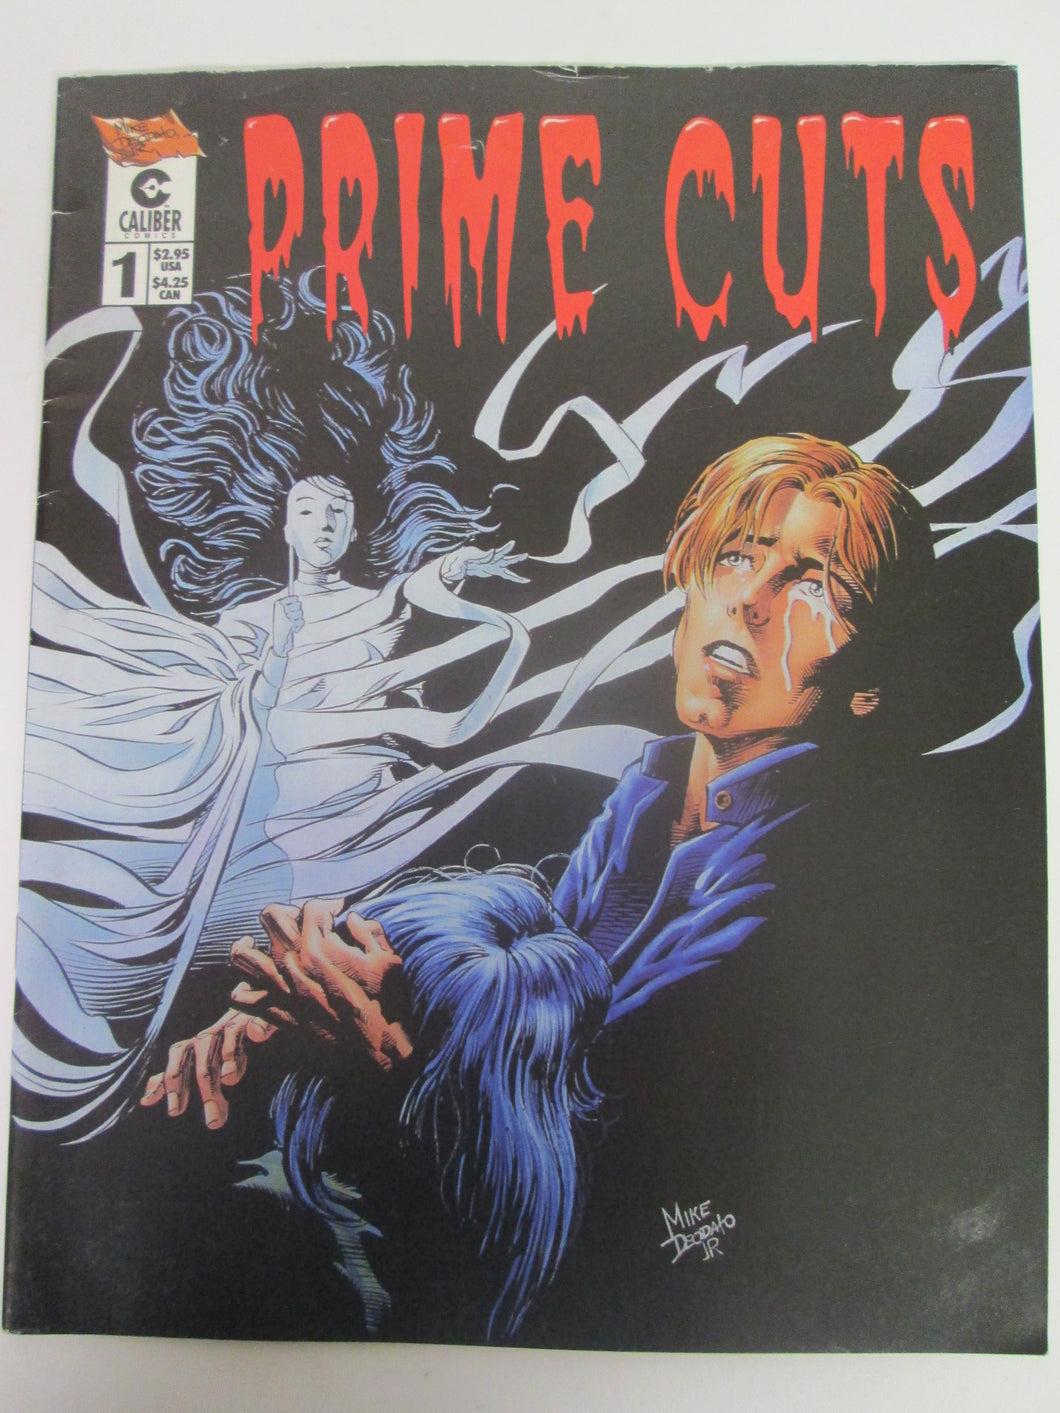 Prime Cuts by Mike Deodato #1 1996 Caliber comics